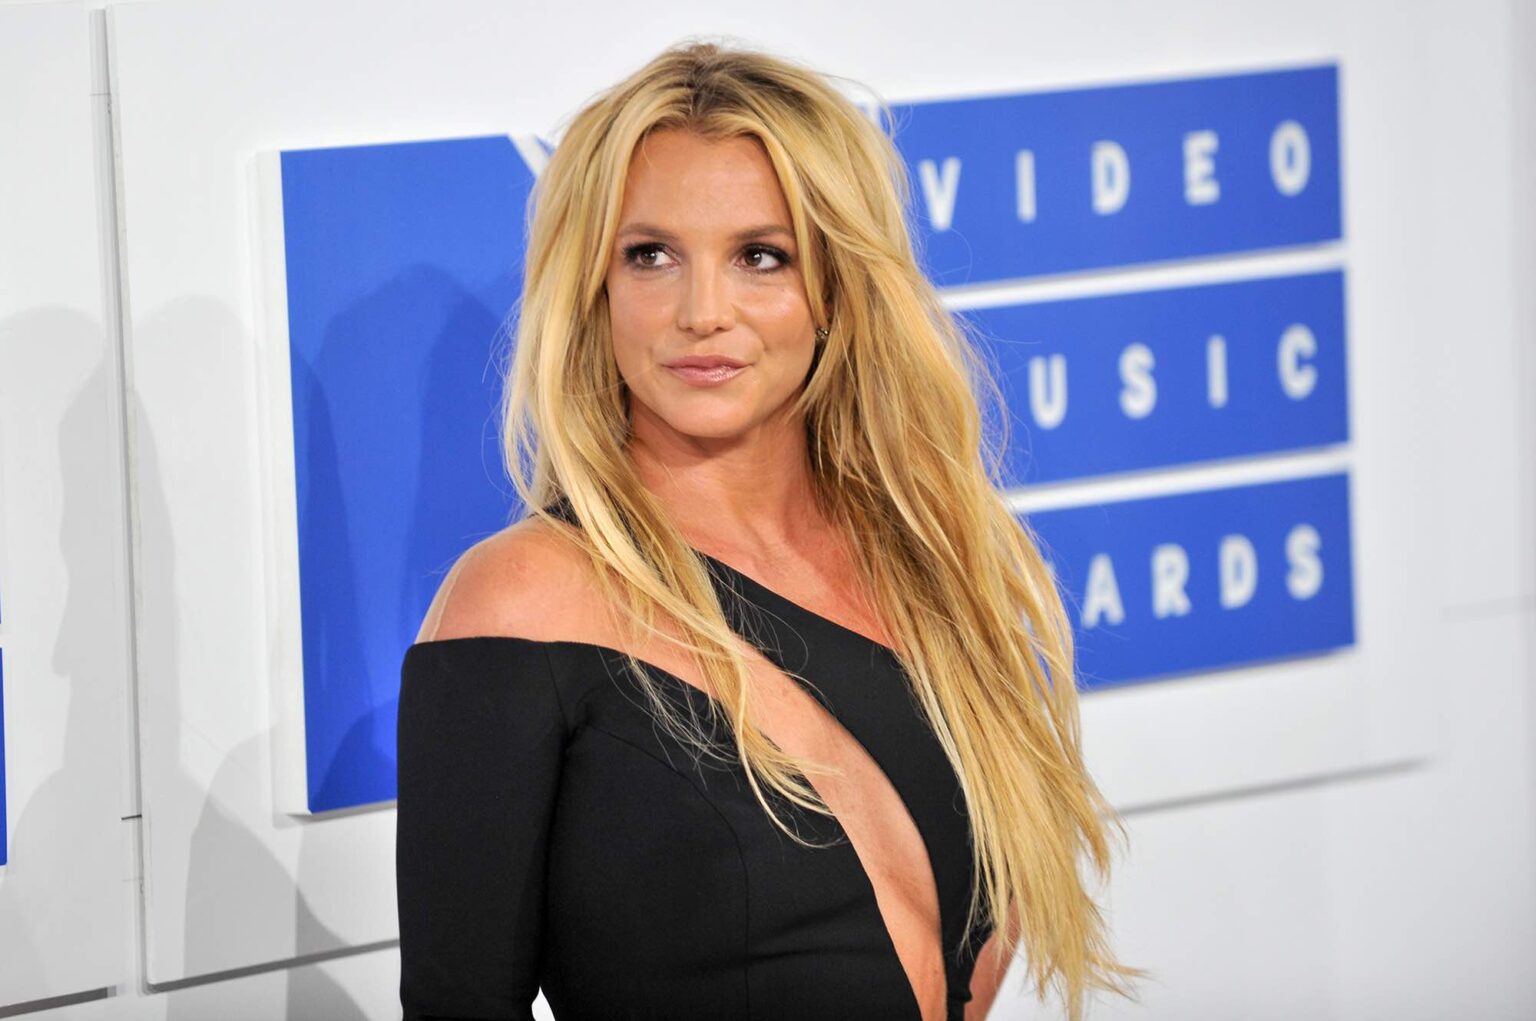 With celebrities talking about how they’ve felt “uncomfortable” on 'The Ellen DeGeneres Show'. Did mean Ellen coax Britney Spears into theft?